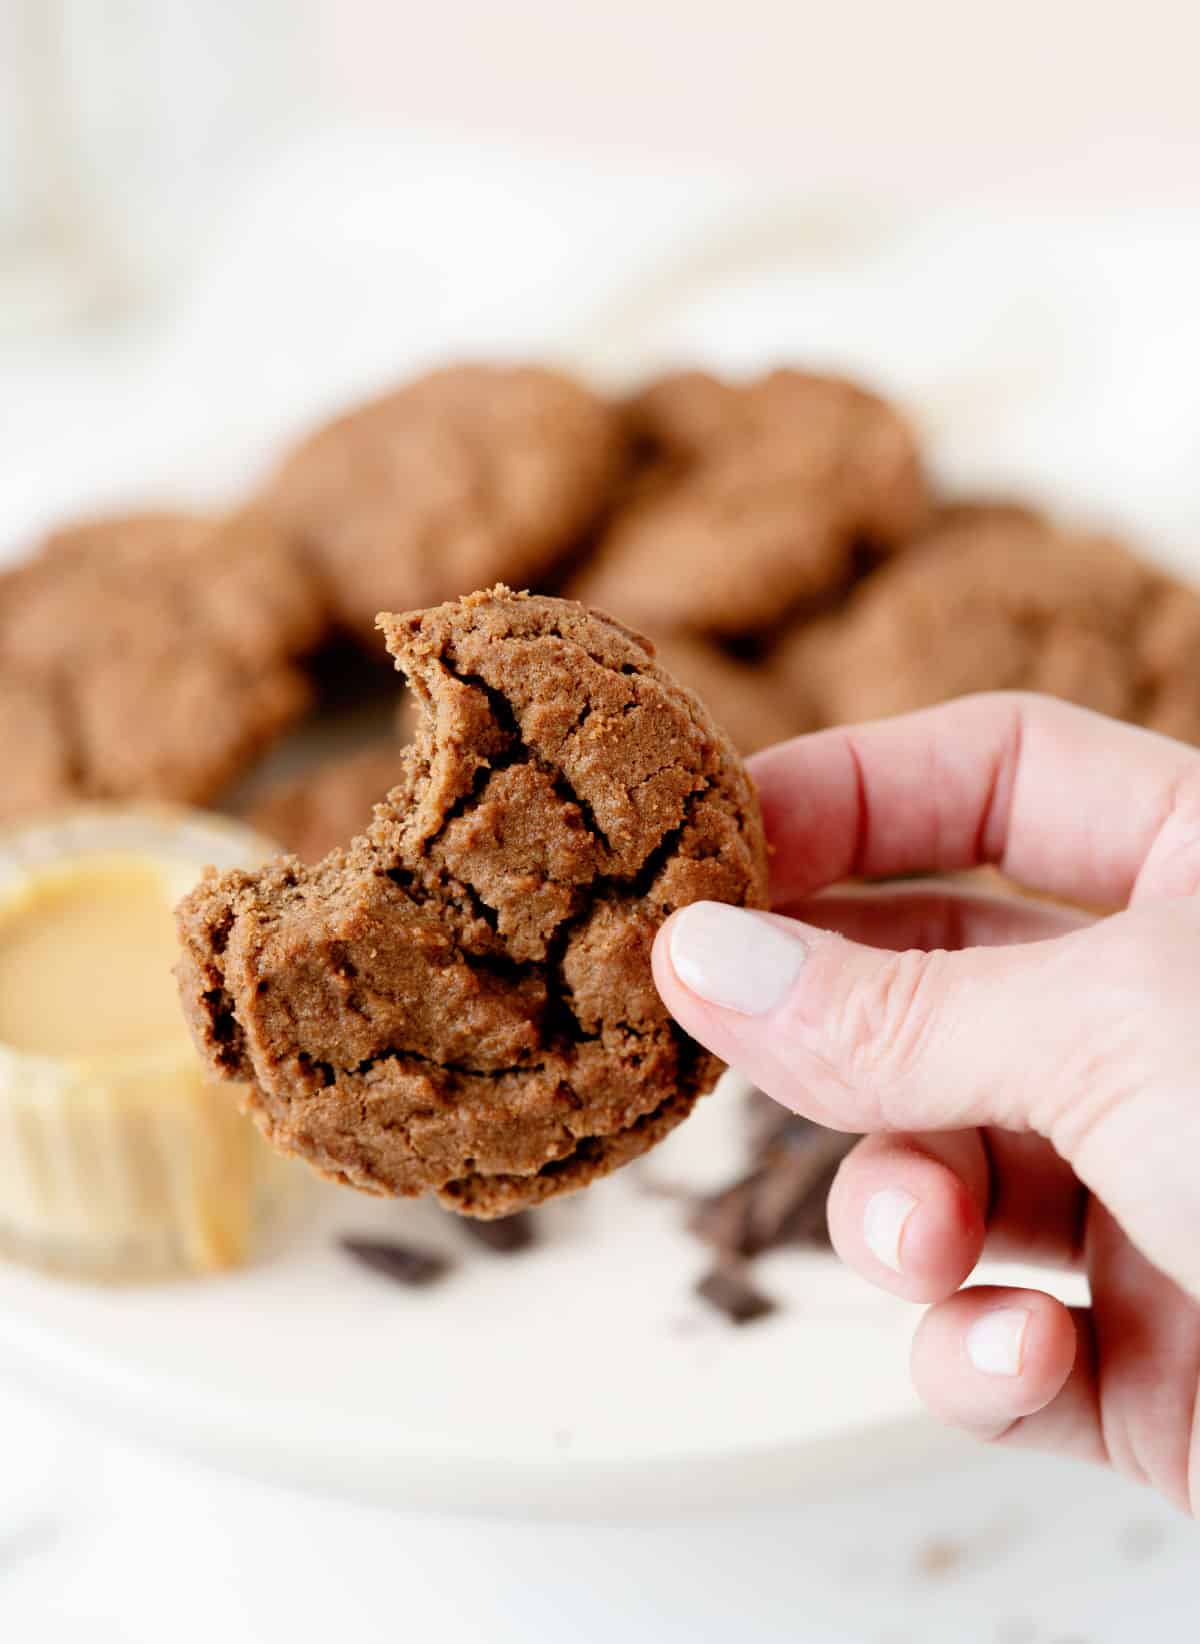 Holding a bitten chocolate cookie with white background and blurred plate of cookies and bowl of peanut butter.